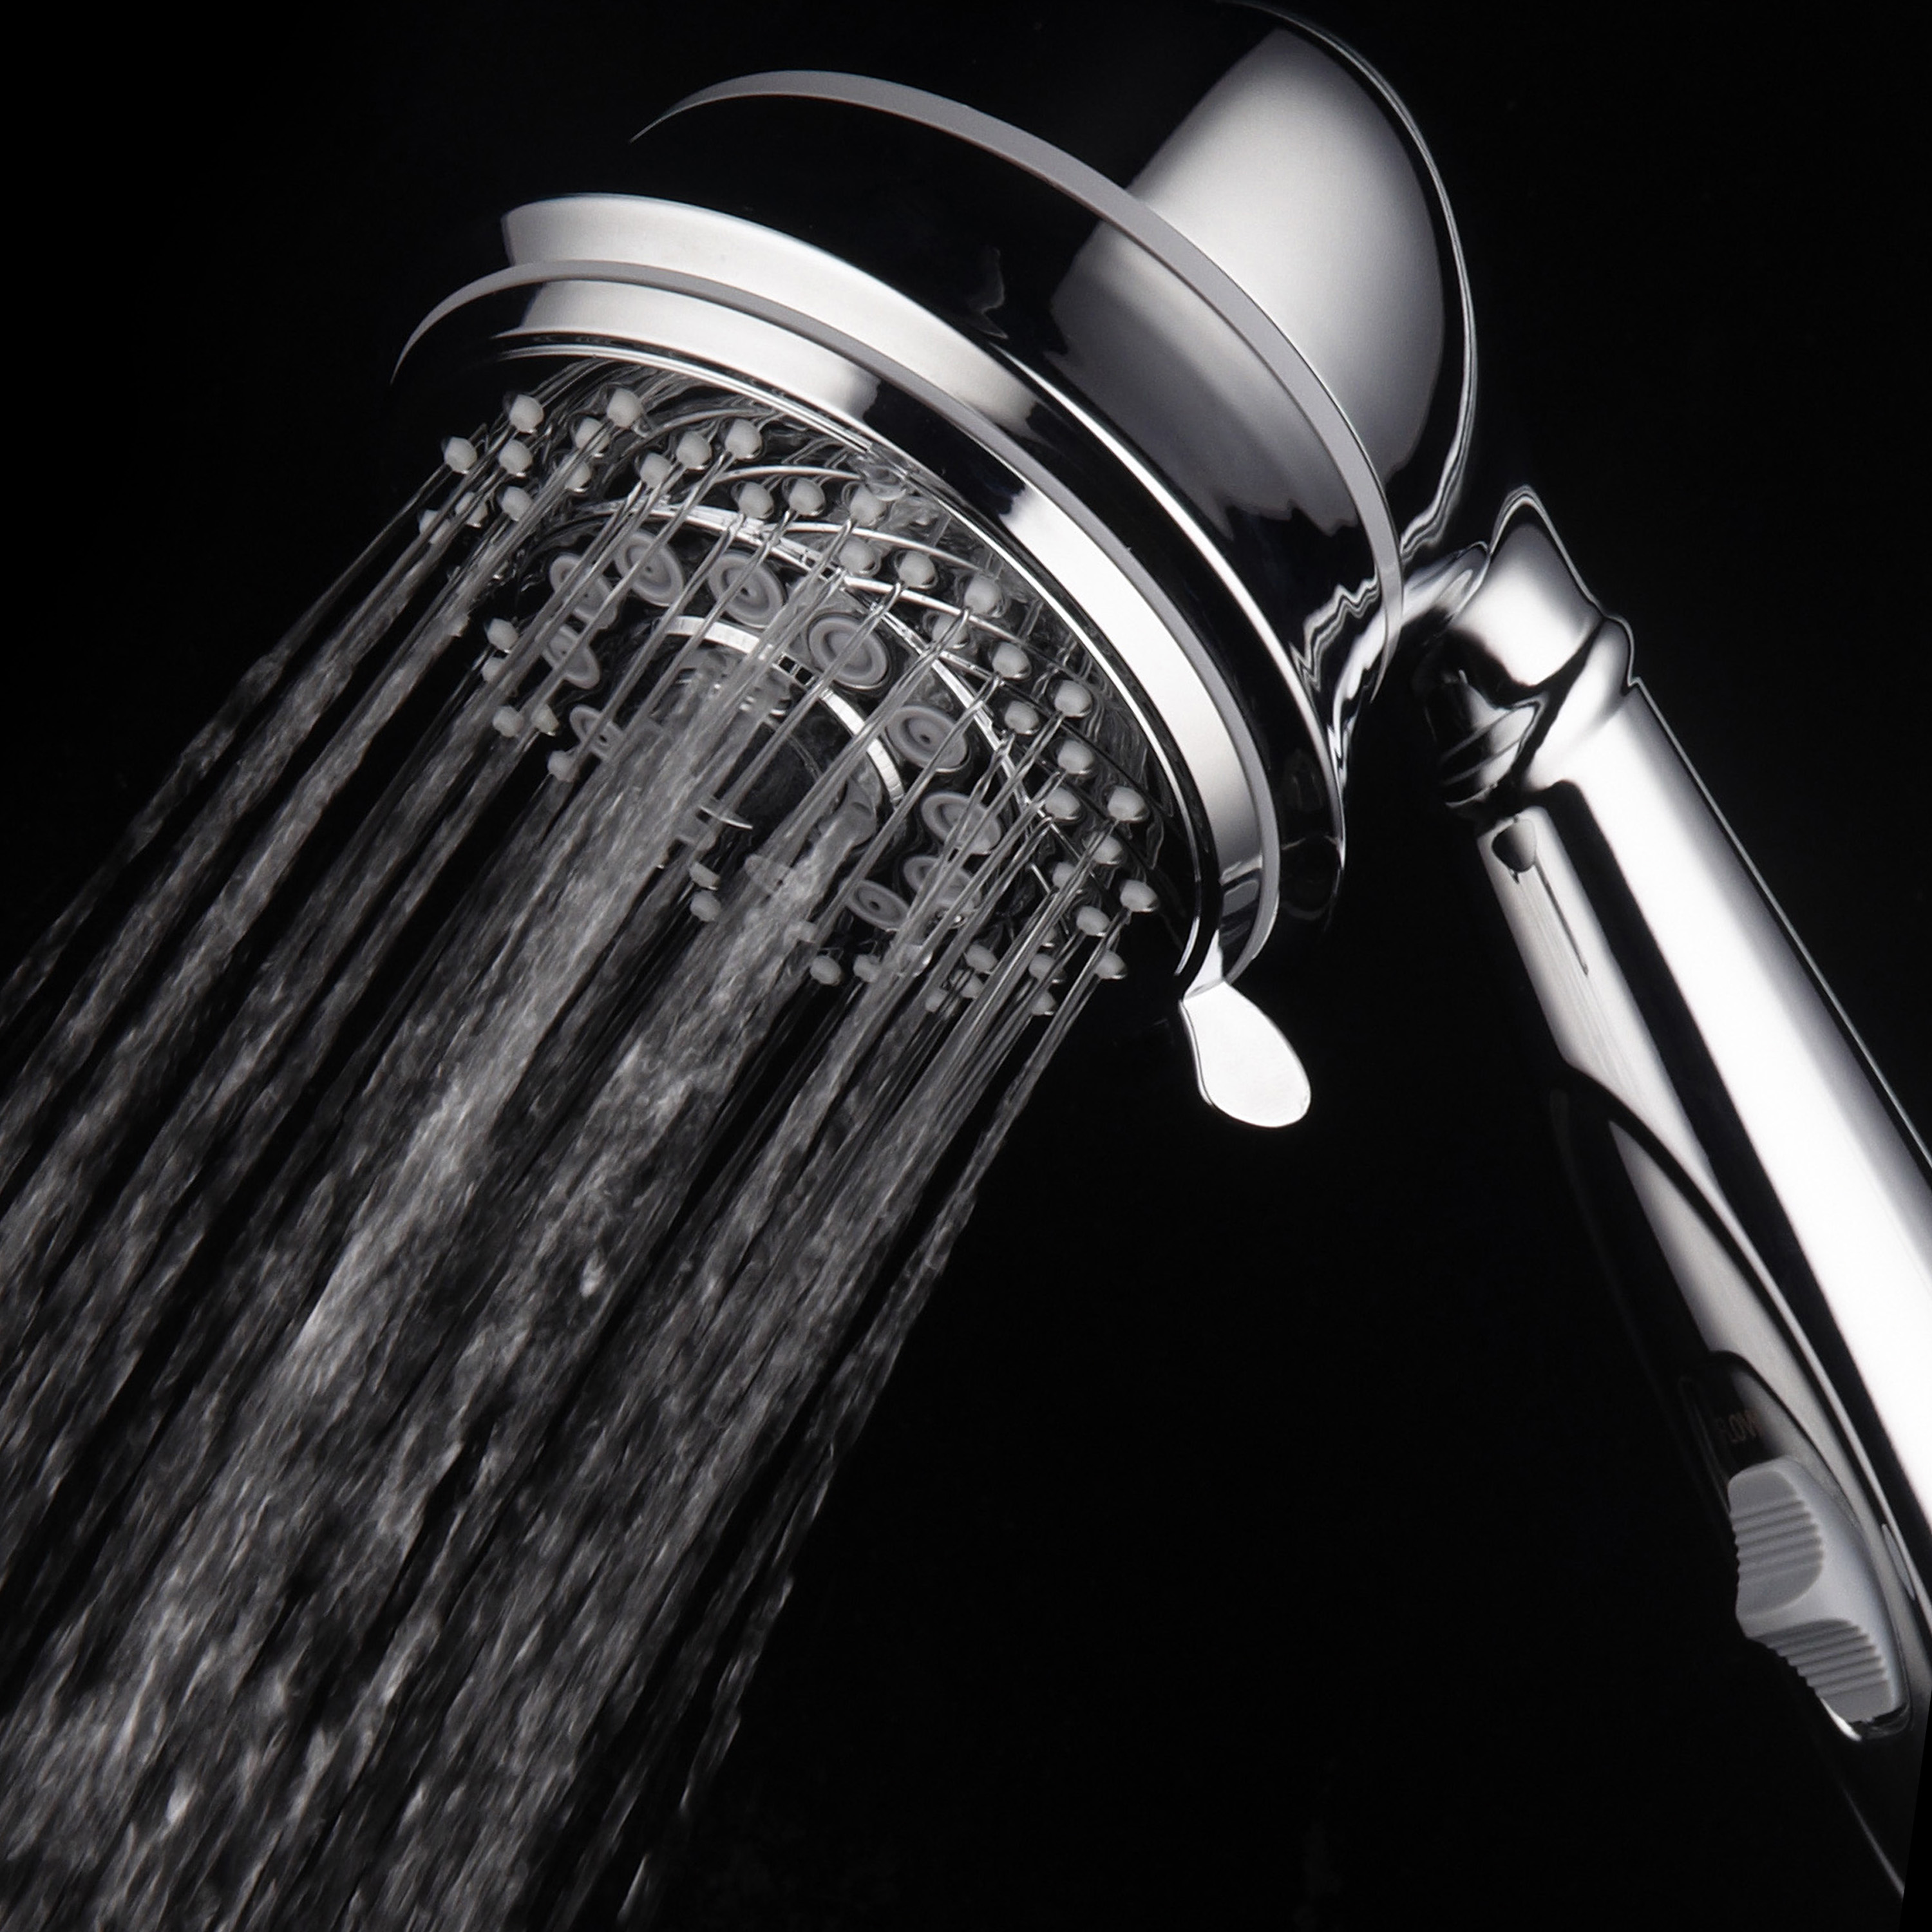 HotelSpa AquaCare 7-Setting, 3-Stage Filtered Handheld Shower Head, Chrome - image 5 of 8